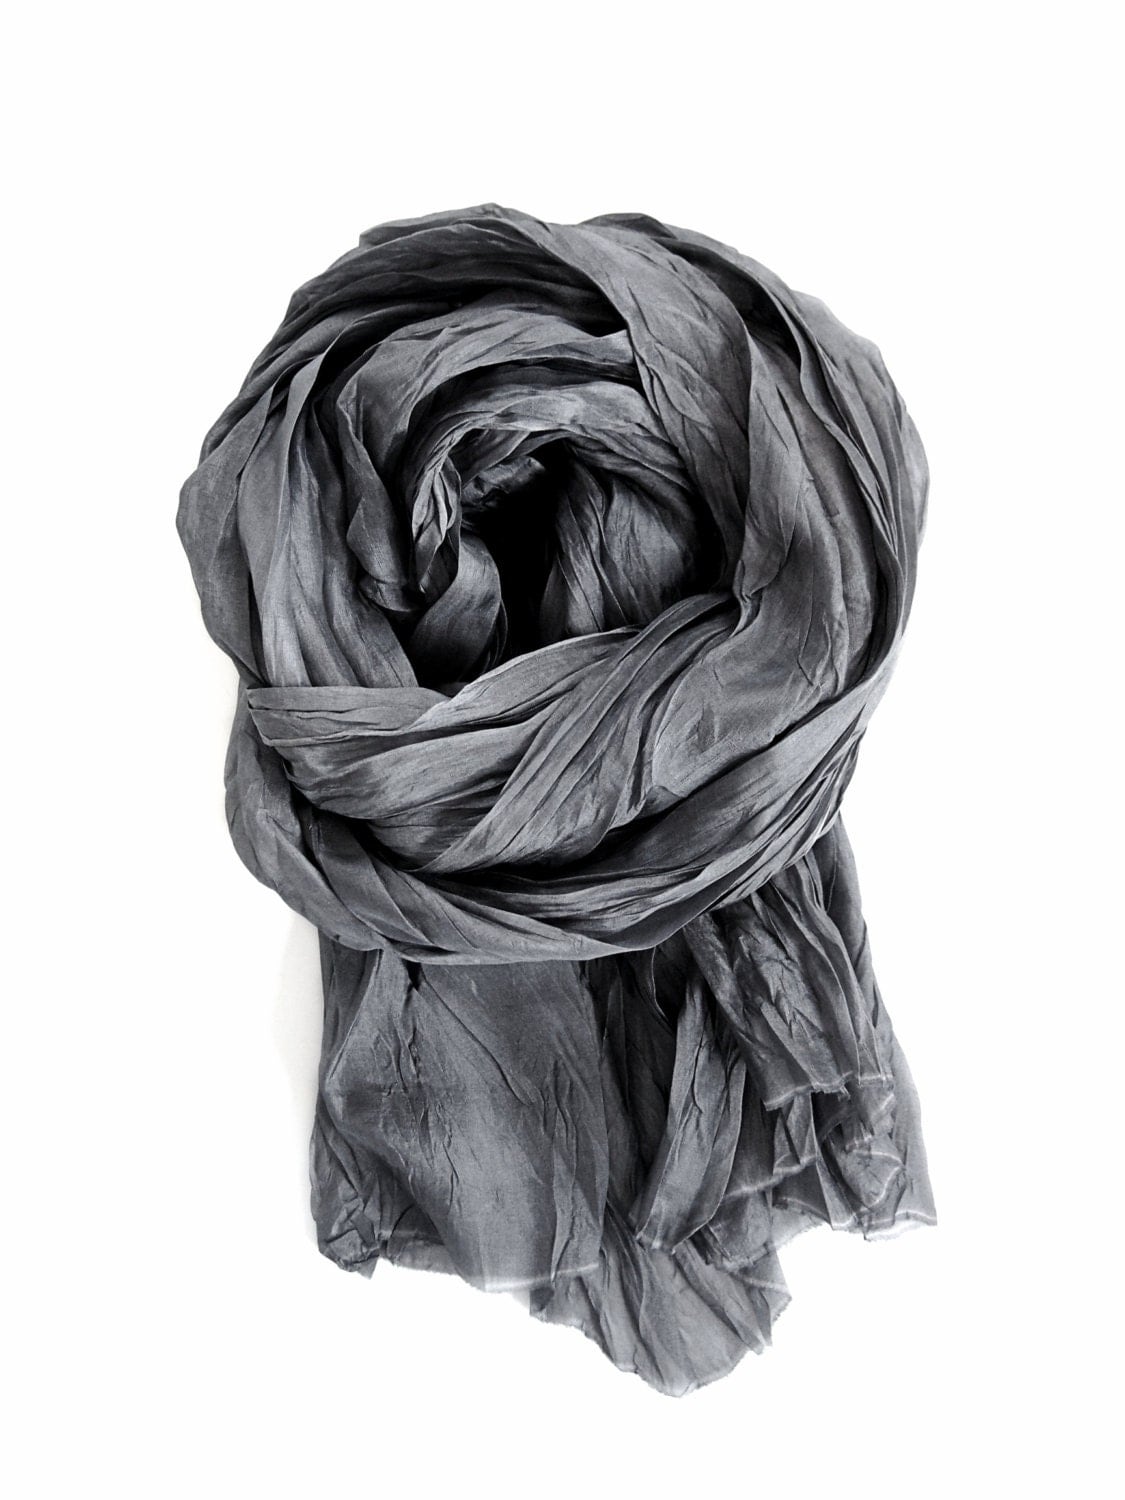 Charcoal Gray Silk Scarf Hand Dyed Gray Scarf Mens